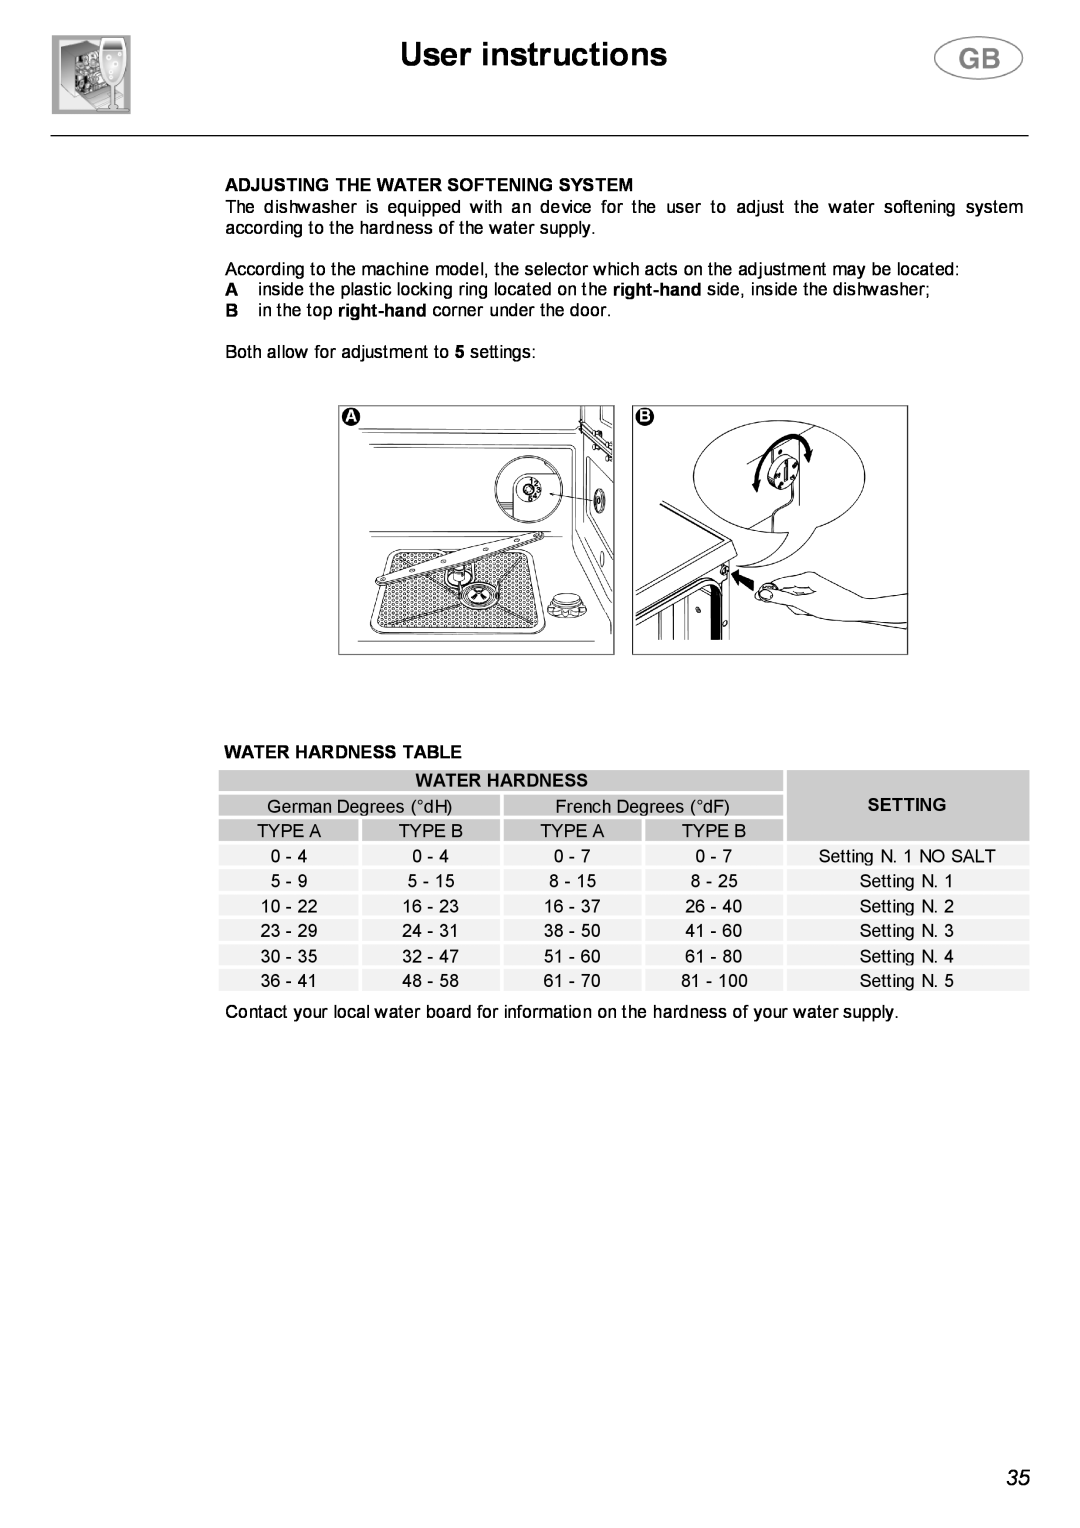 Smeg LVF32G instruction manual Adjusting The Water Softening System, Water Hardness Table, Setting, User instructions 